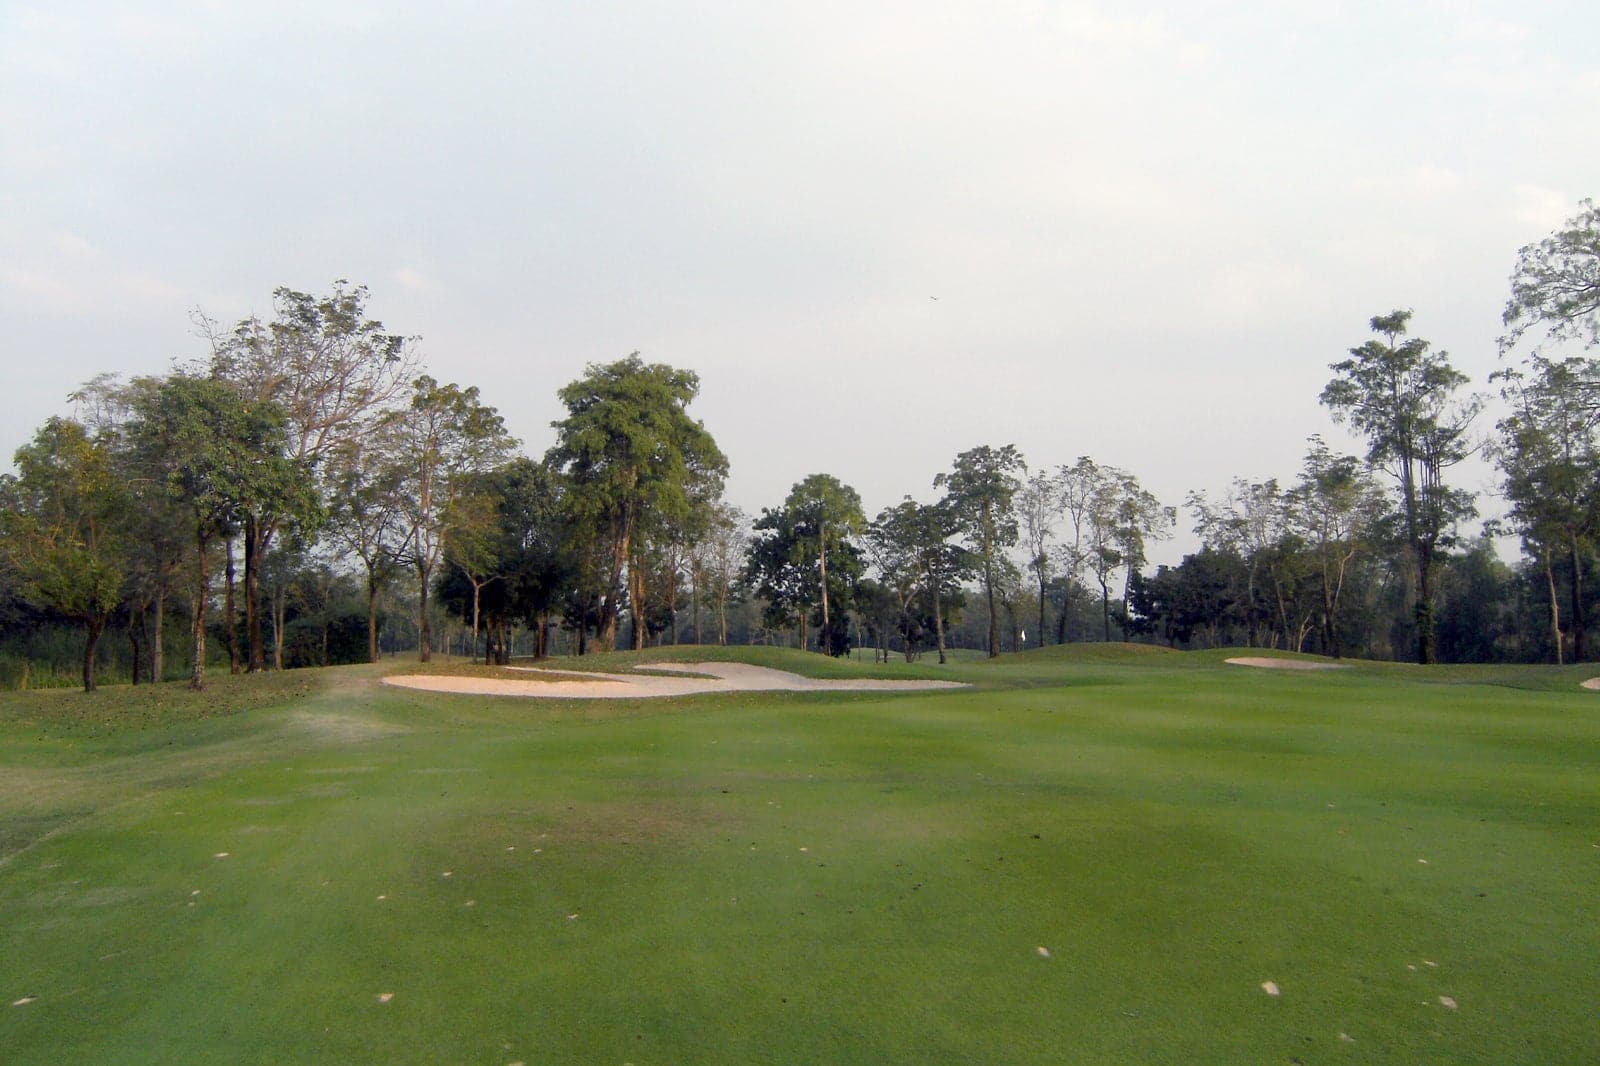 Excellent grass at the Lam Luk Ka Country Club in Bangkok